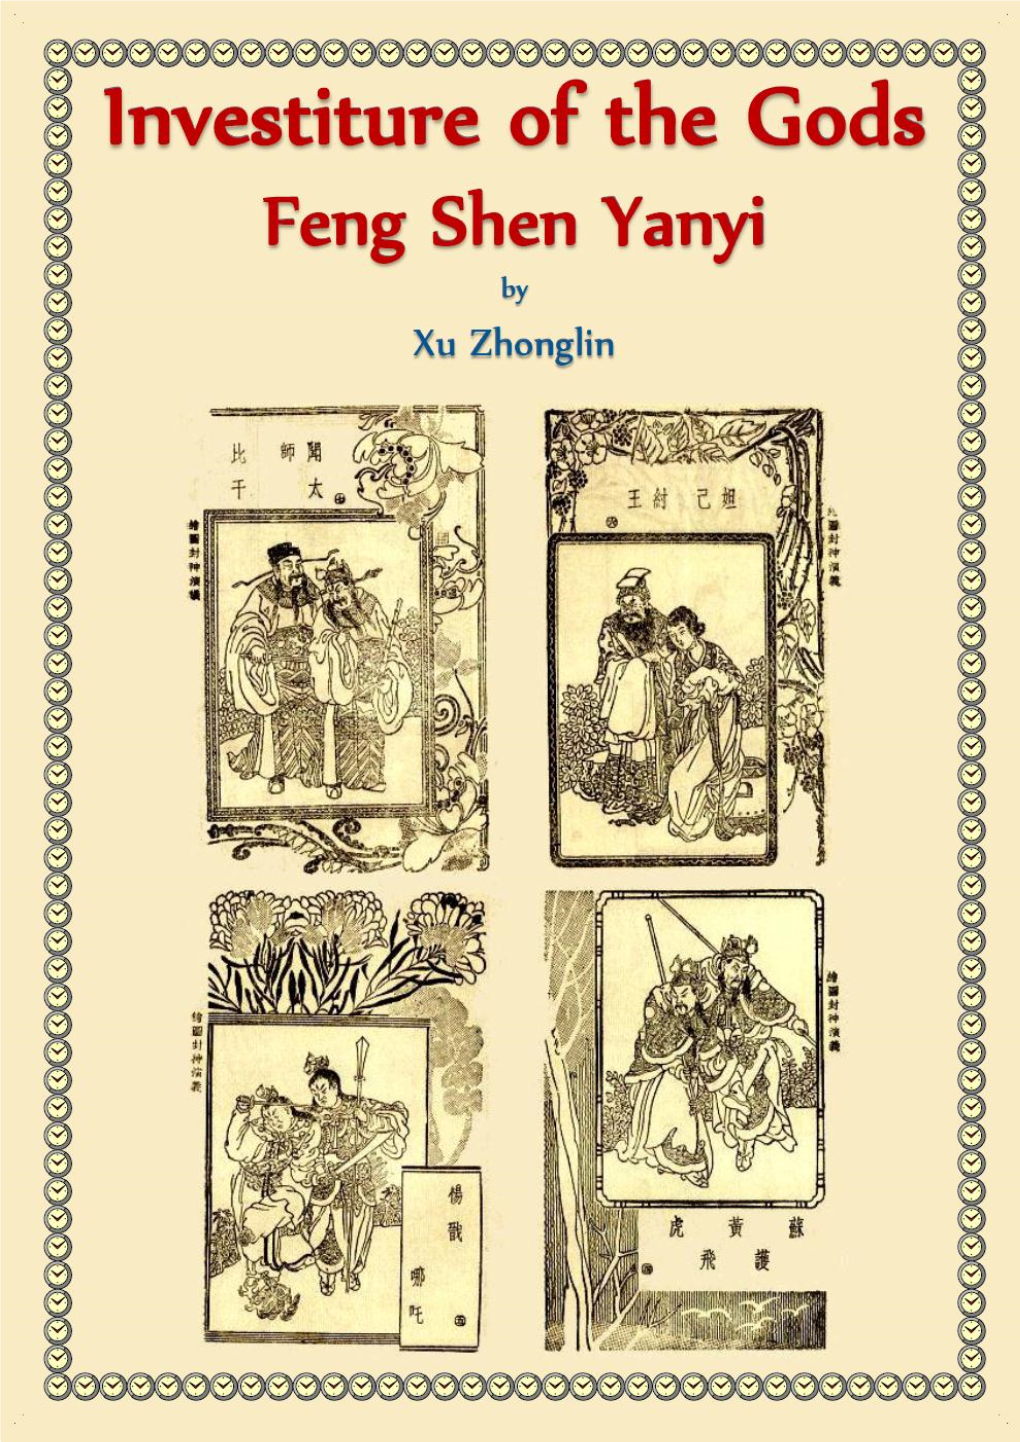 The Investiture of the Gods, Feng Shen Yanyi